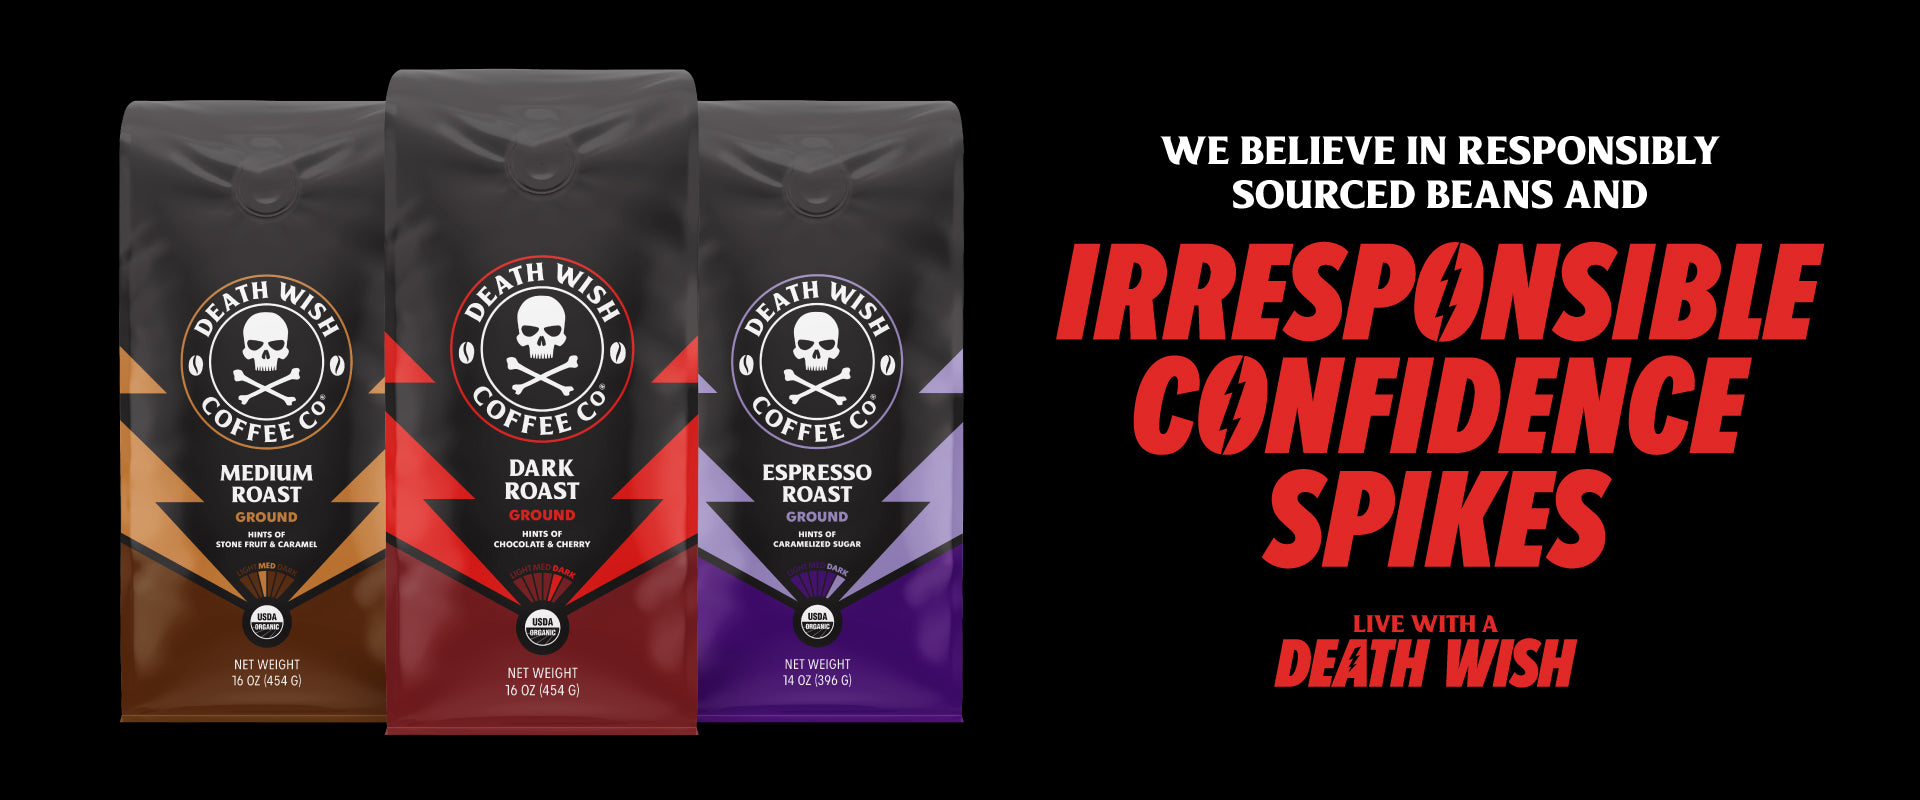 Death Wish Coffee - Live With a Death Wish